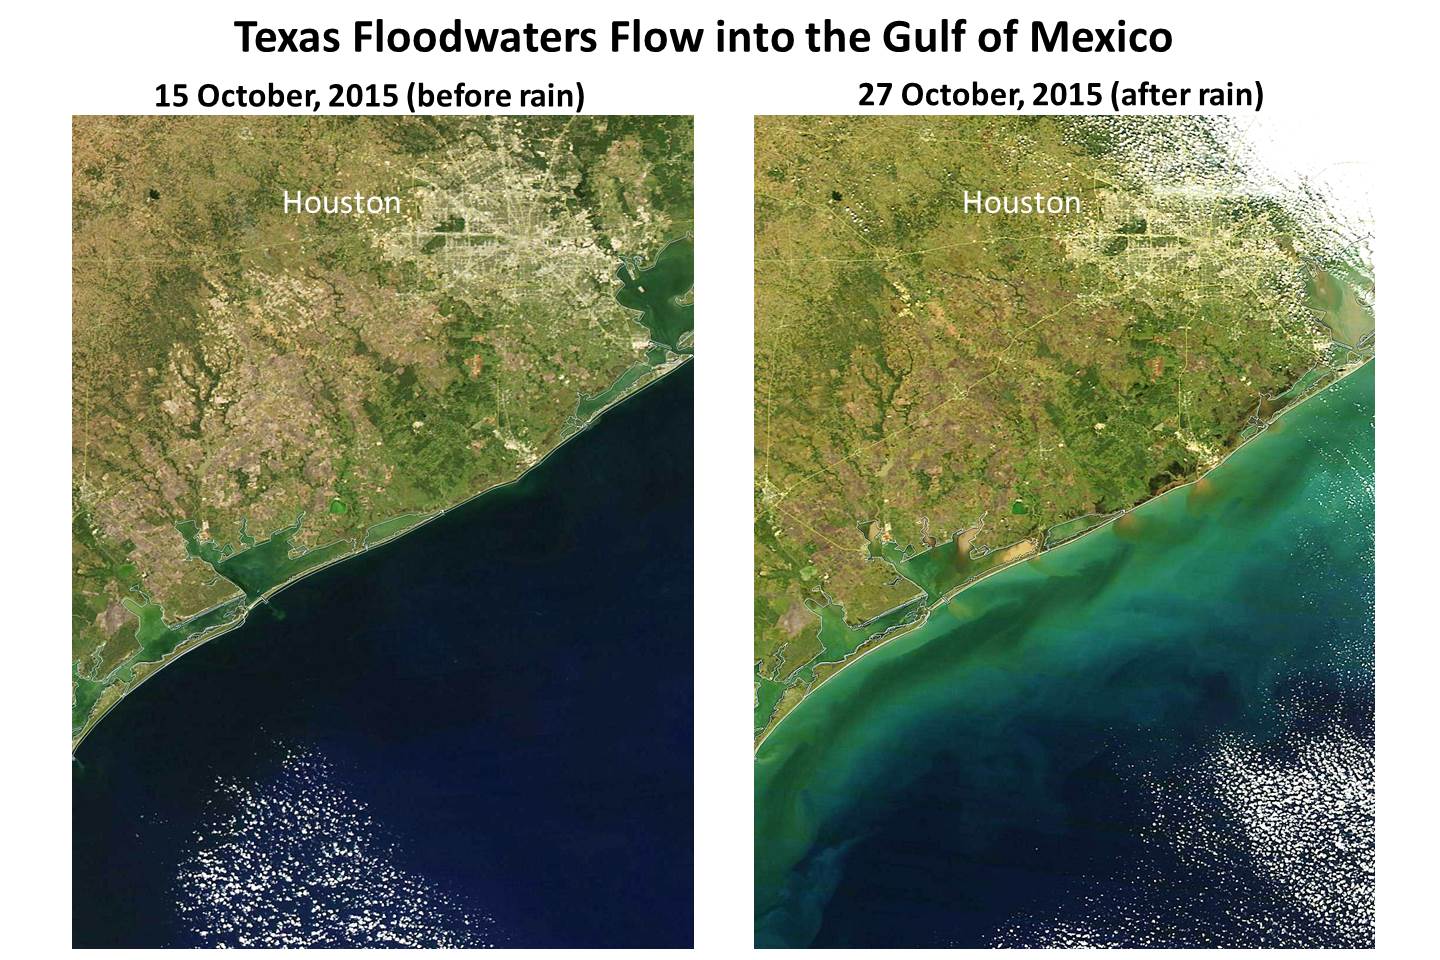 NASA MODIS imagery of Texas floodwaters entering the Gulf of Mexico.